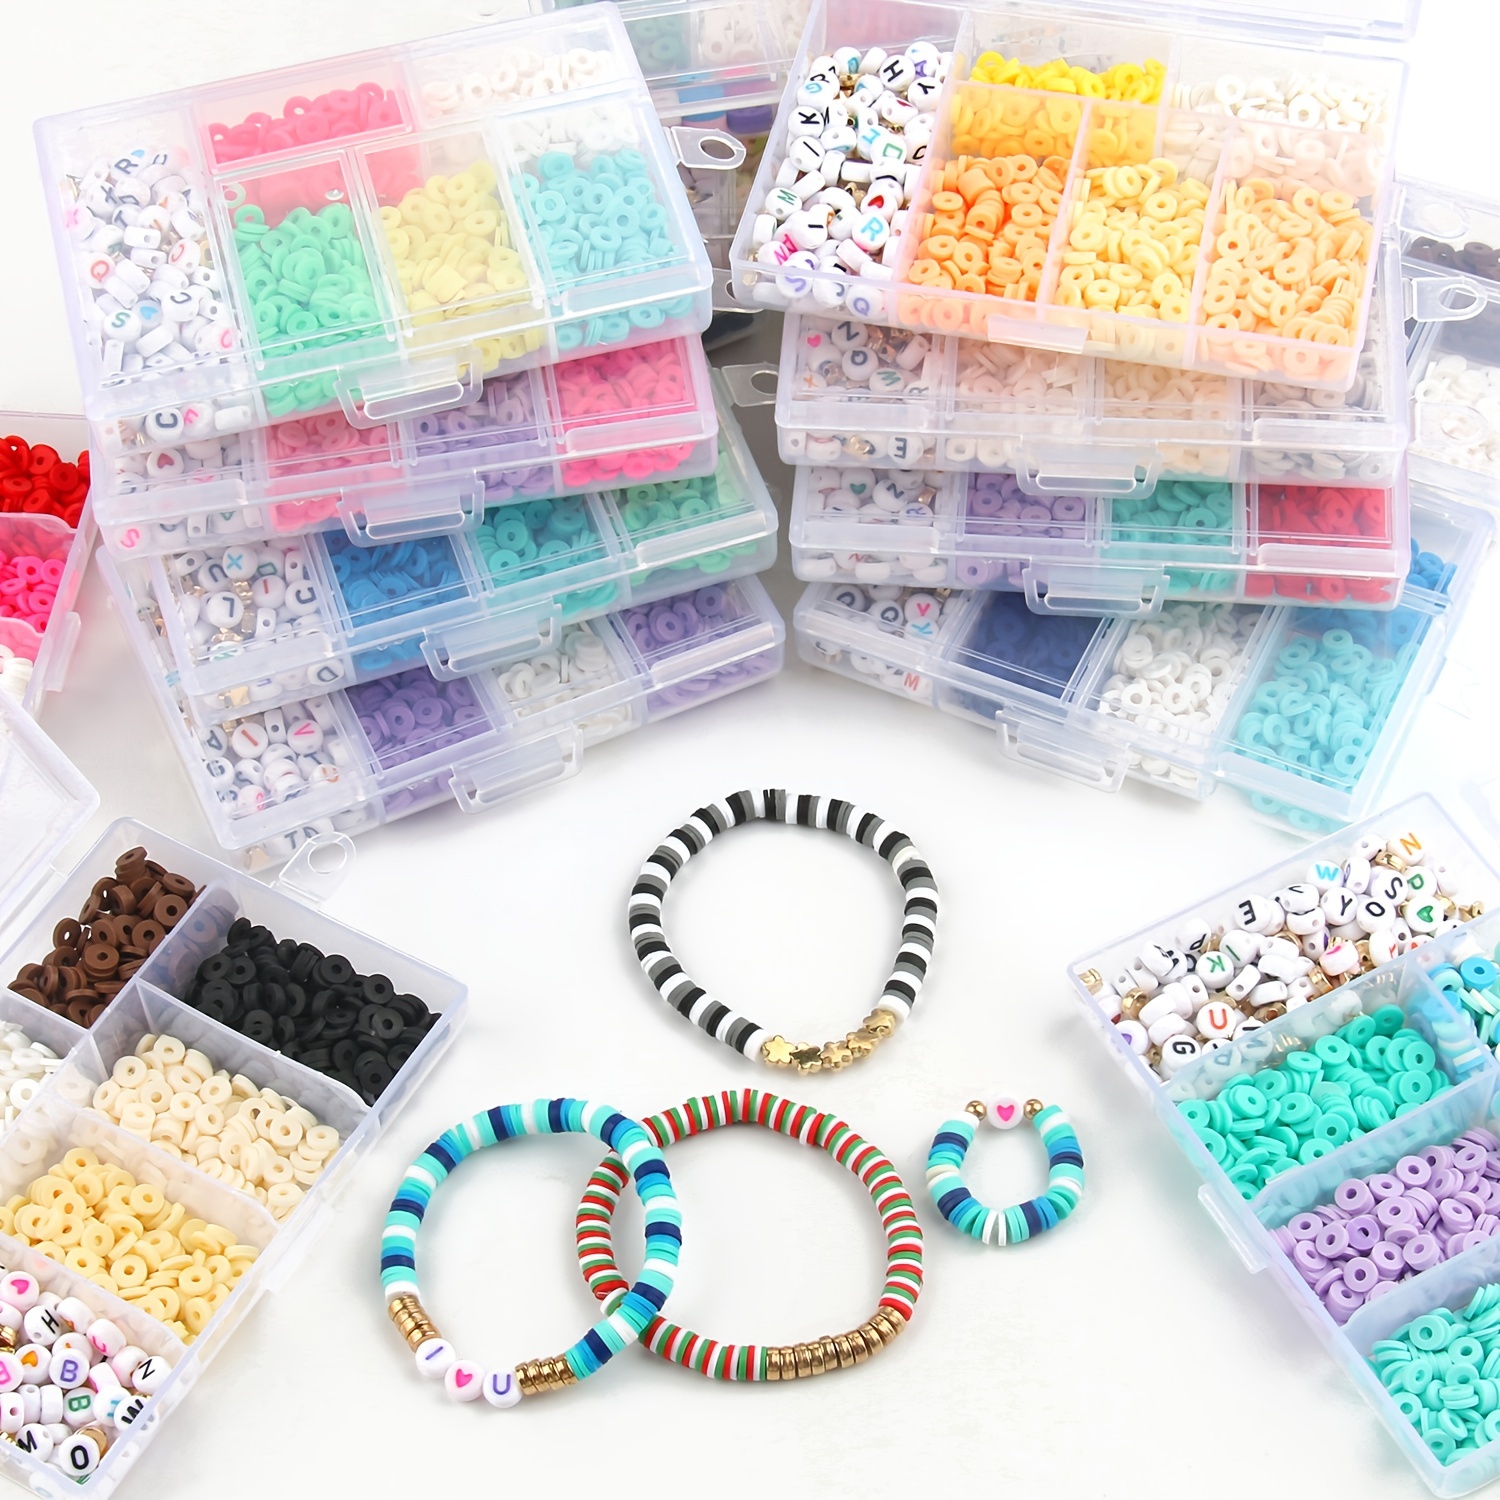 DIY Jewelry kit for children, elastic cord and acrylic beads etc. in a